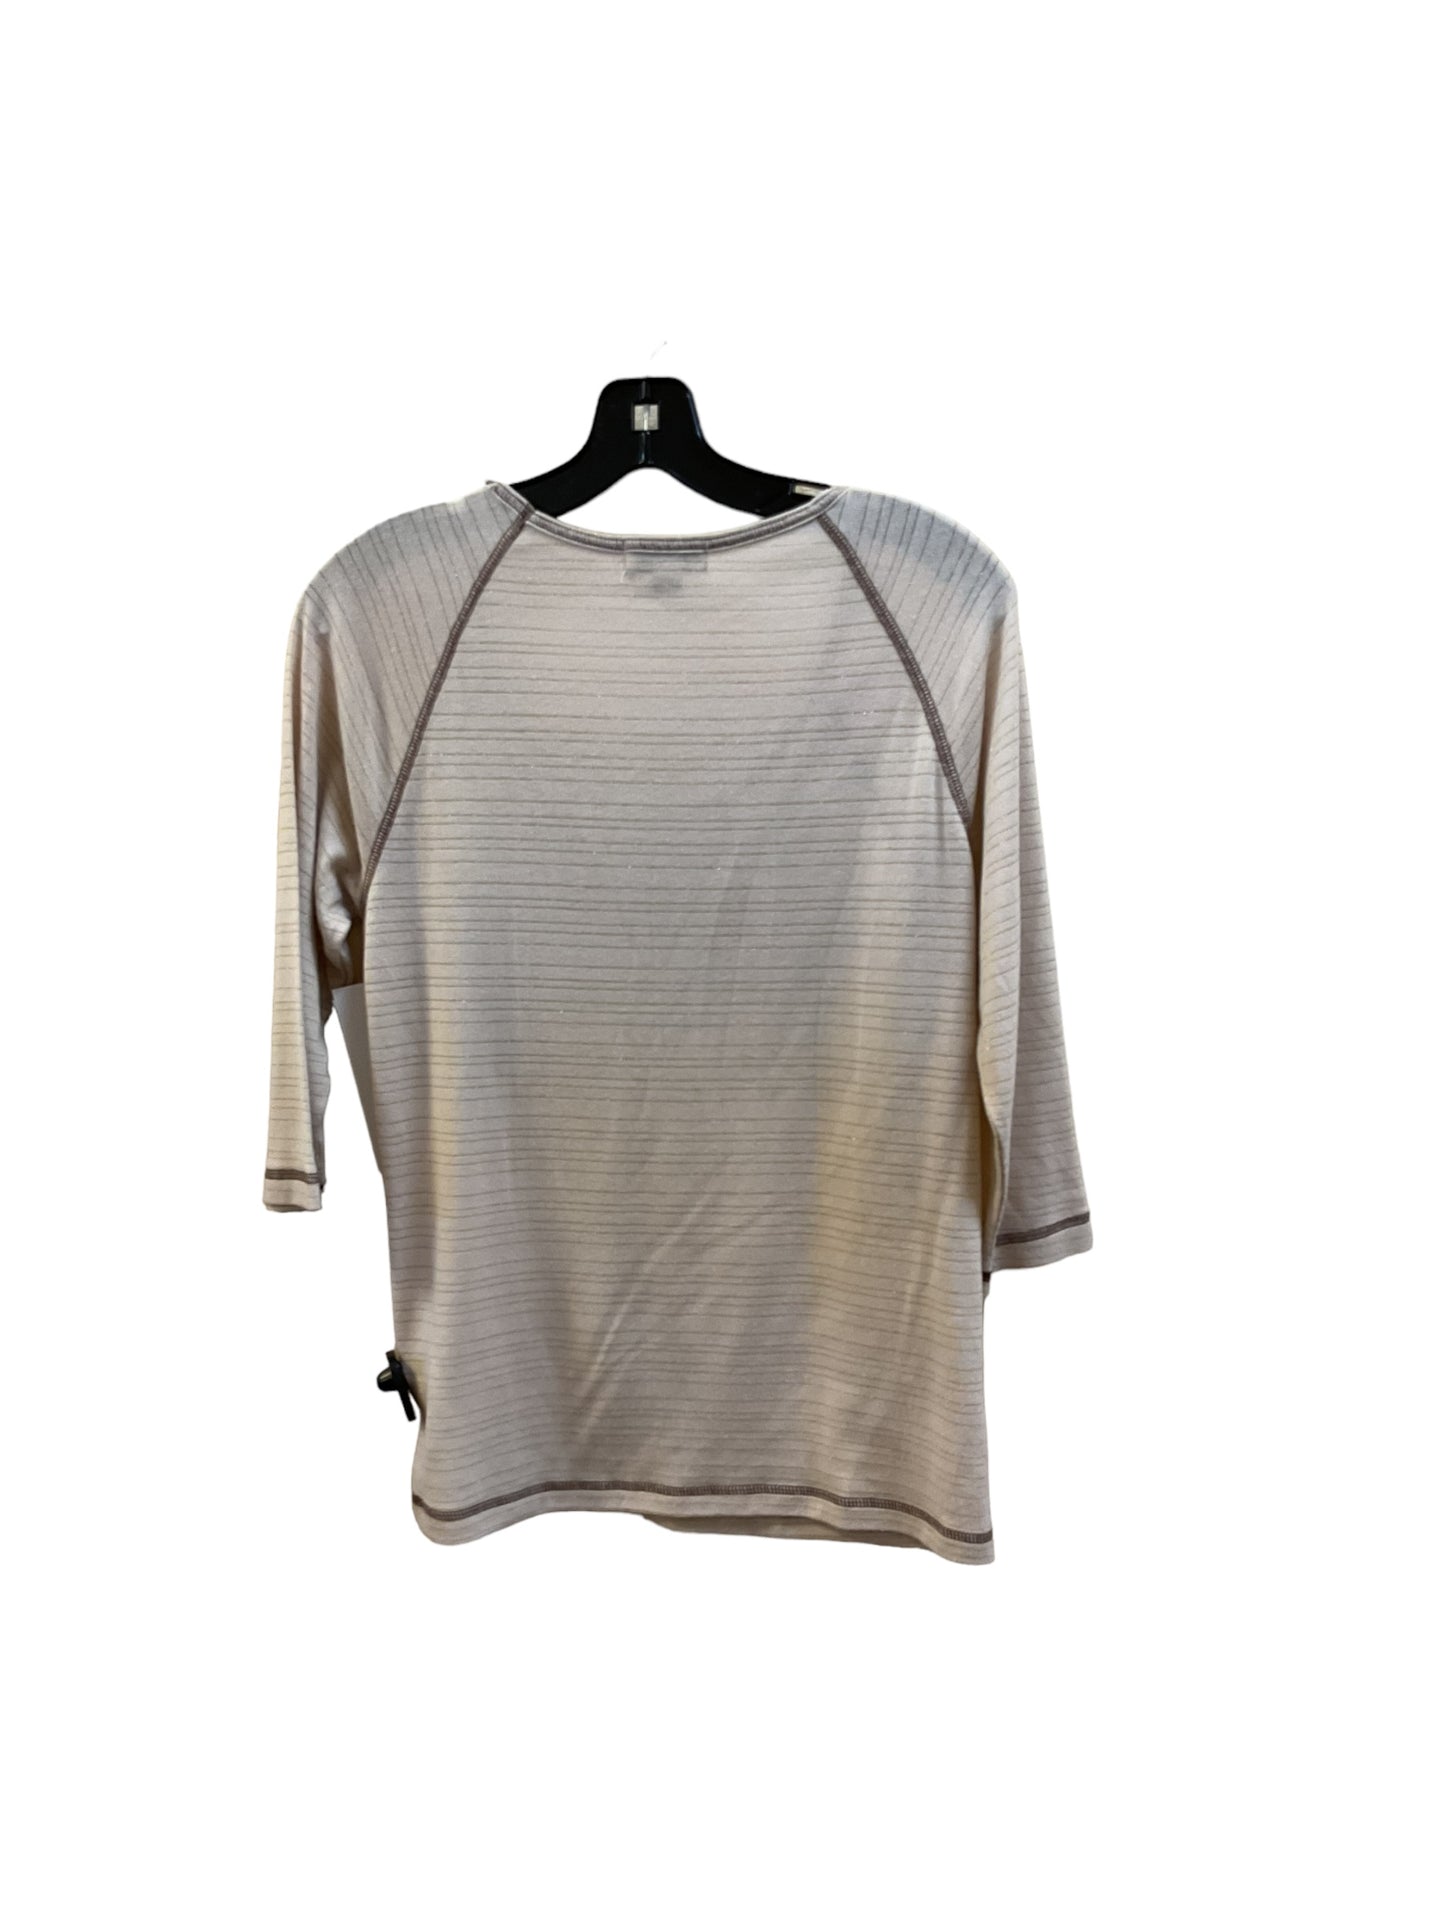 Top Long Sleeve By One World  Size: Petite Large